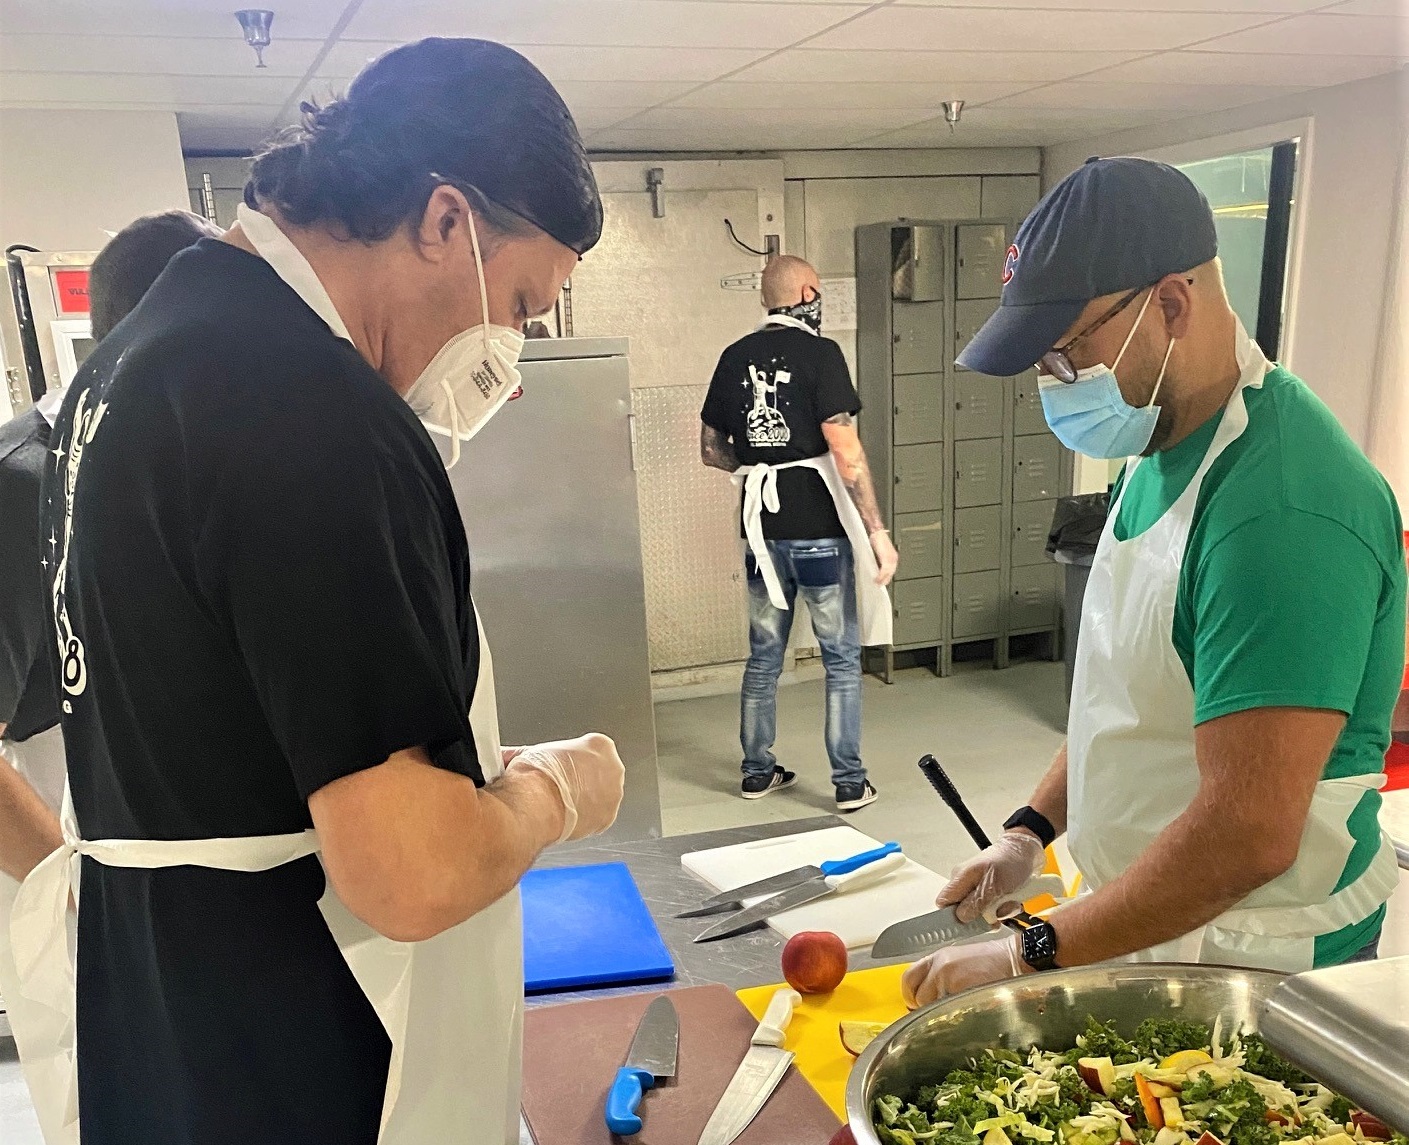 Western Healthcare Volunteers at Dallas LIFE Homeless Recovery Center